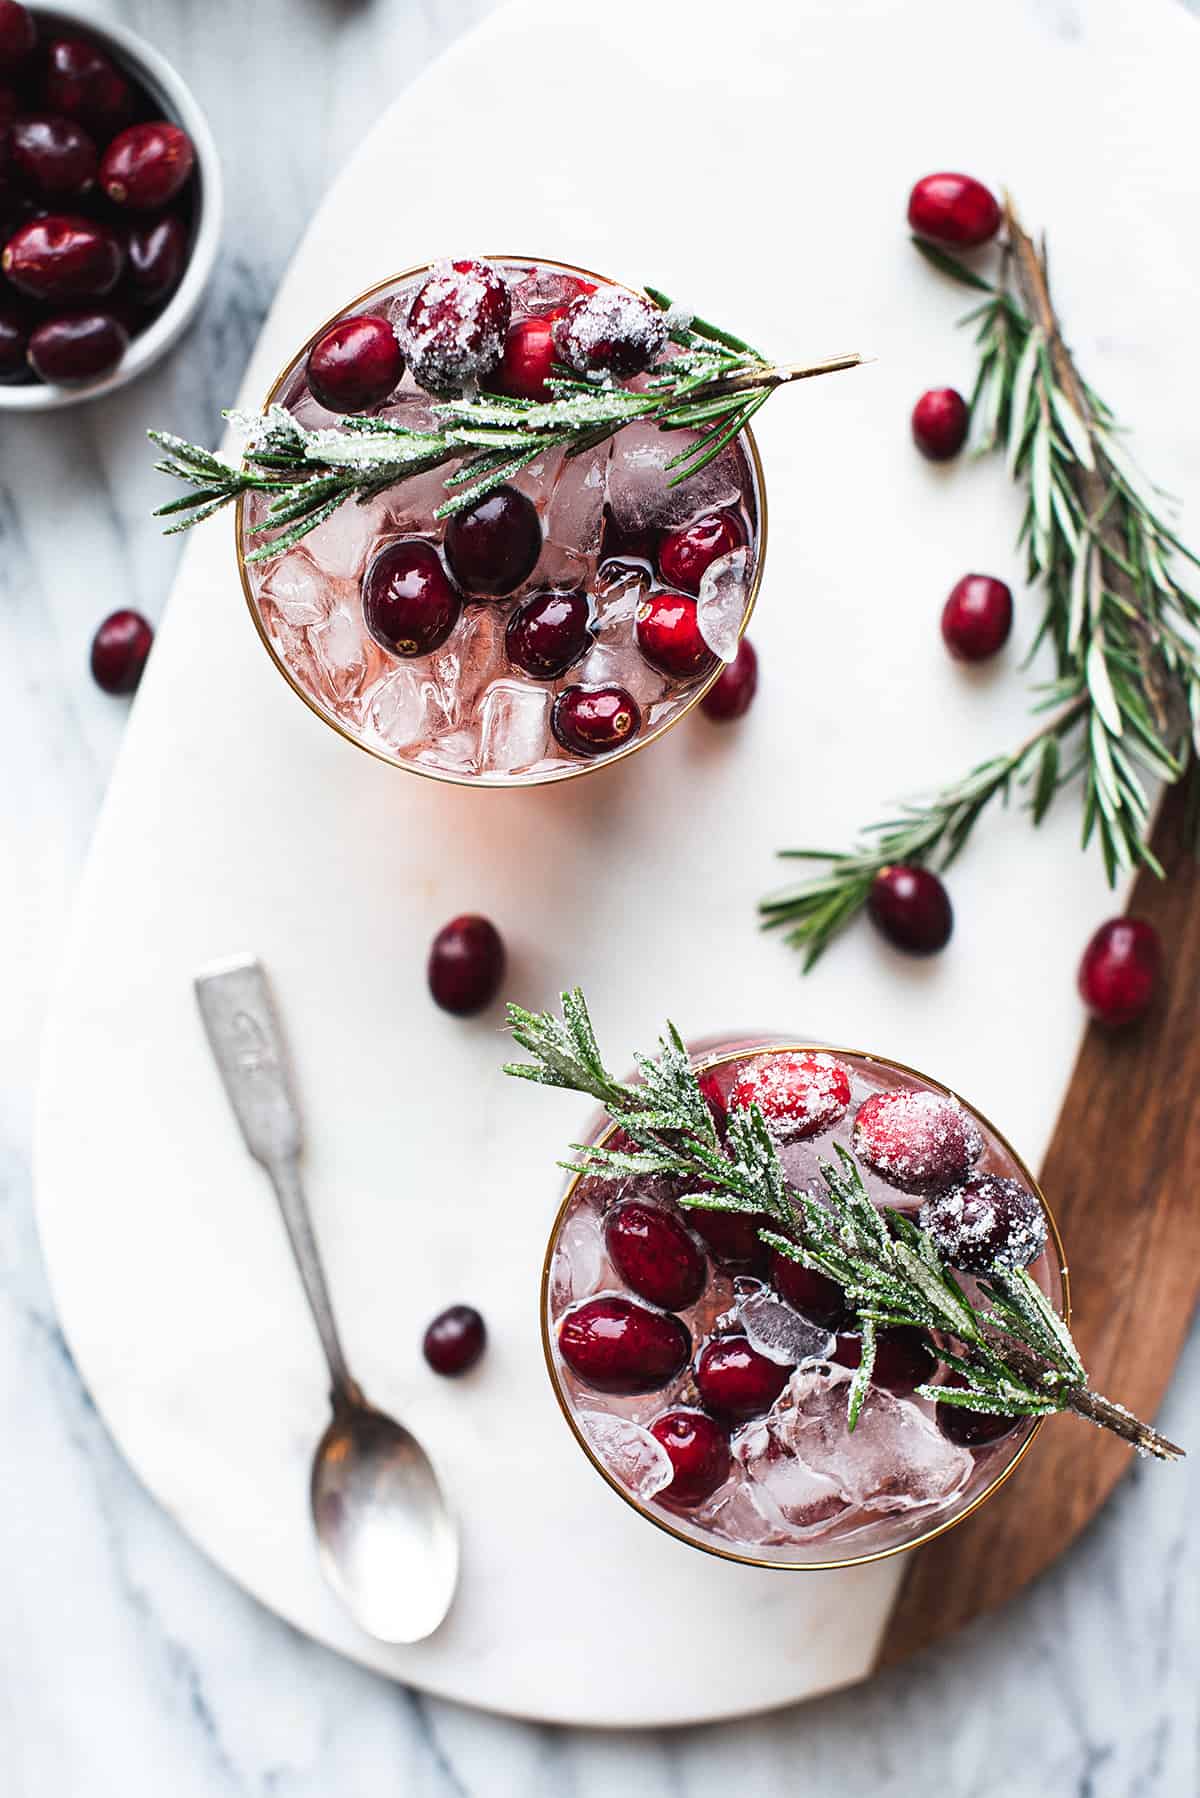 2 cranberry cocktails with rosemary garnish, cranberries & spoon